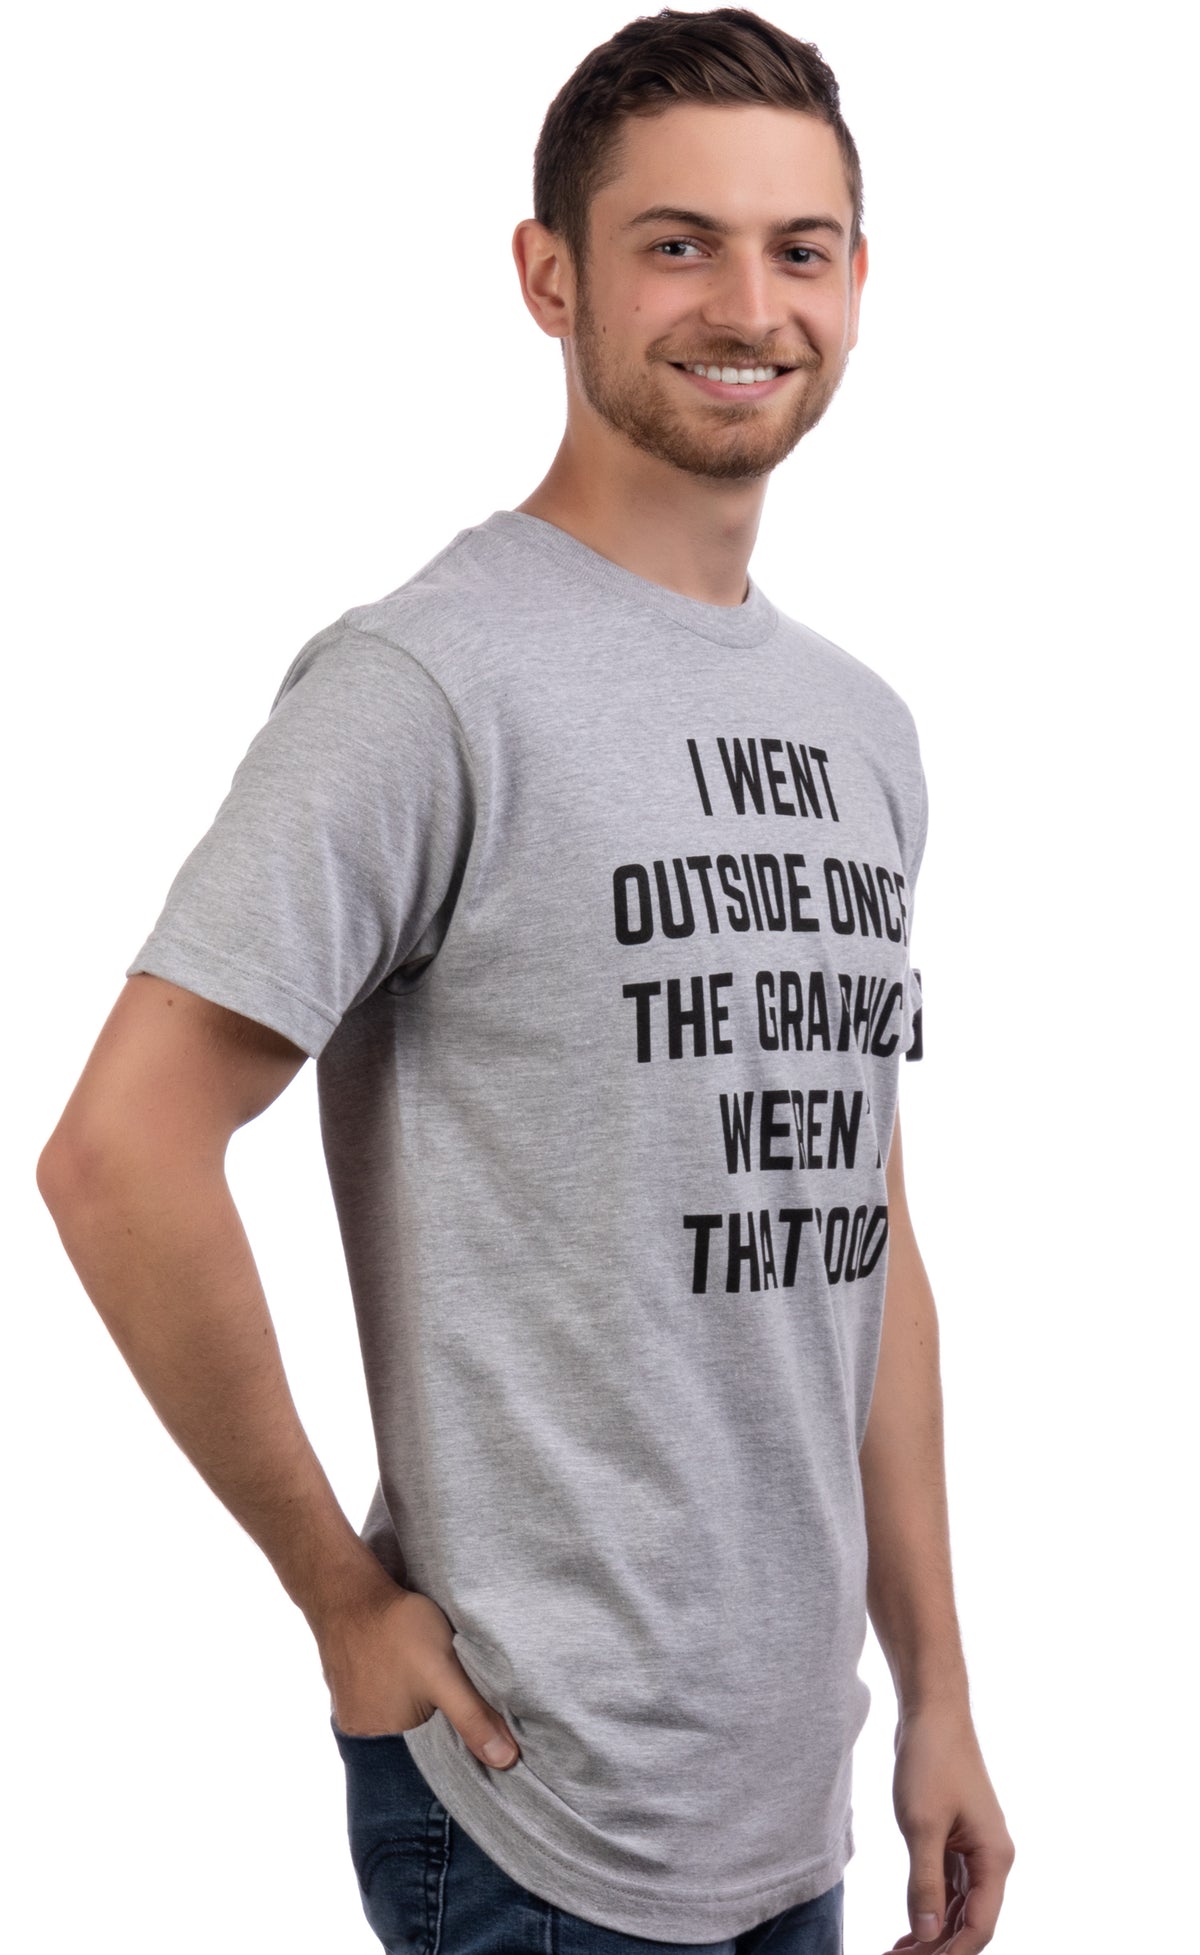 I Went Outside Once, Graphics weren't that Good - Funny Video Gamer T-shirt